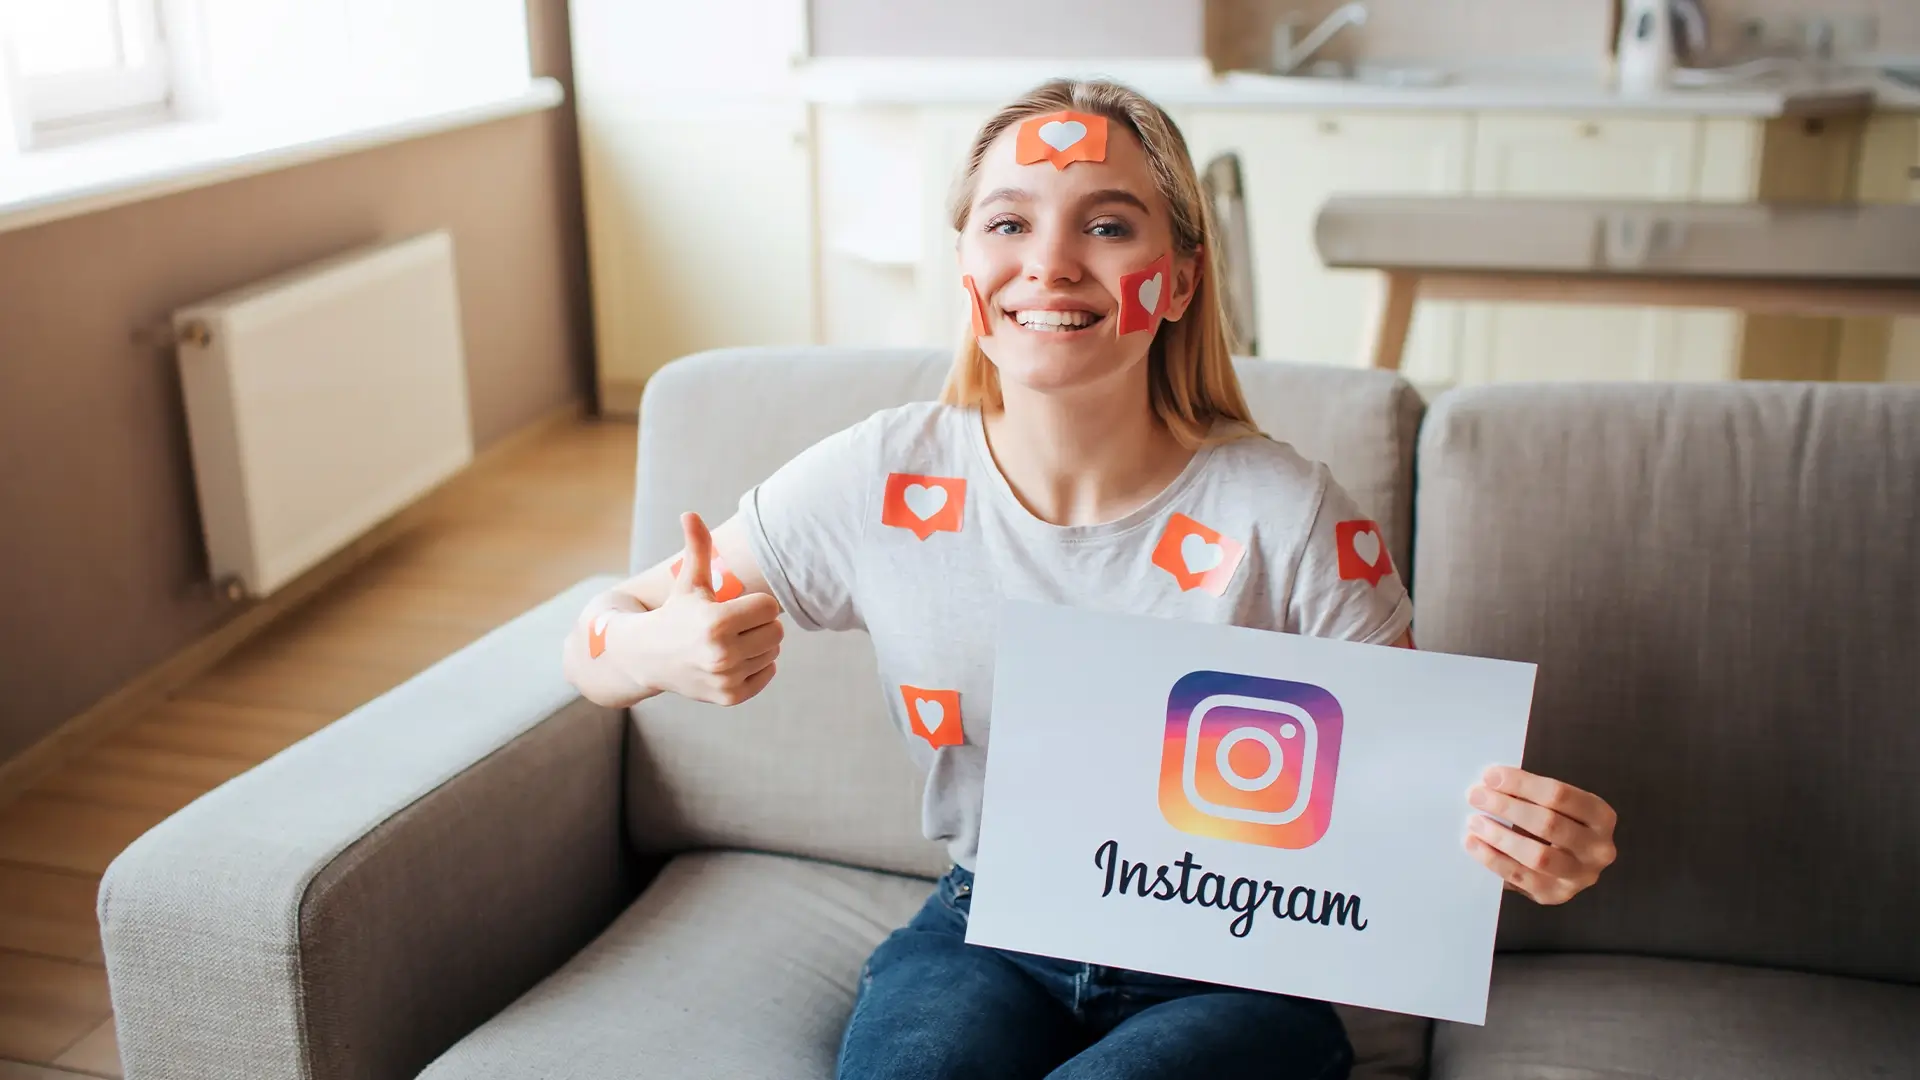 A Guide to Instagram Advertising for Businesses